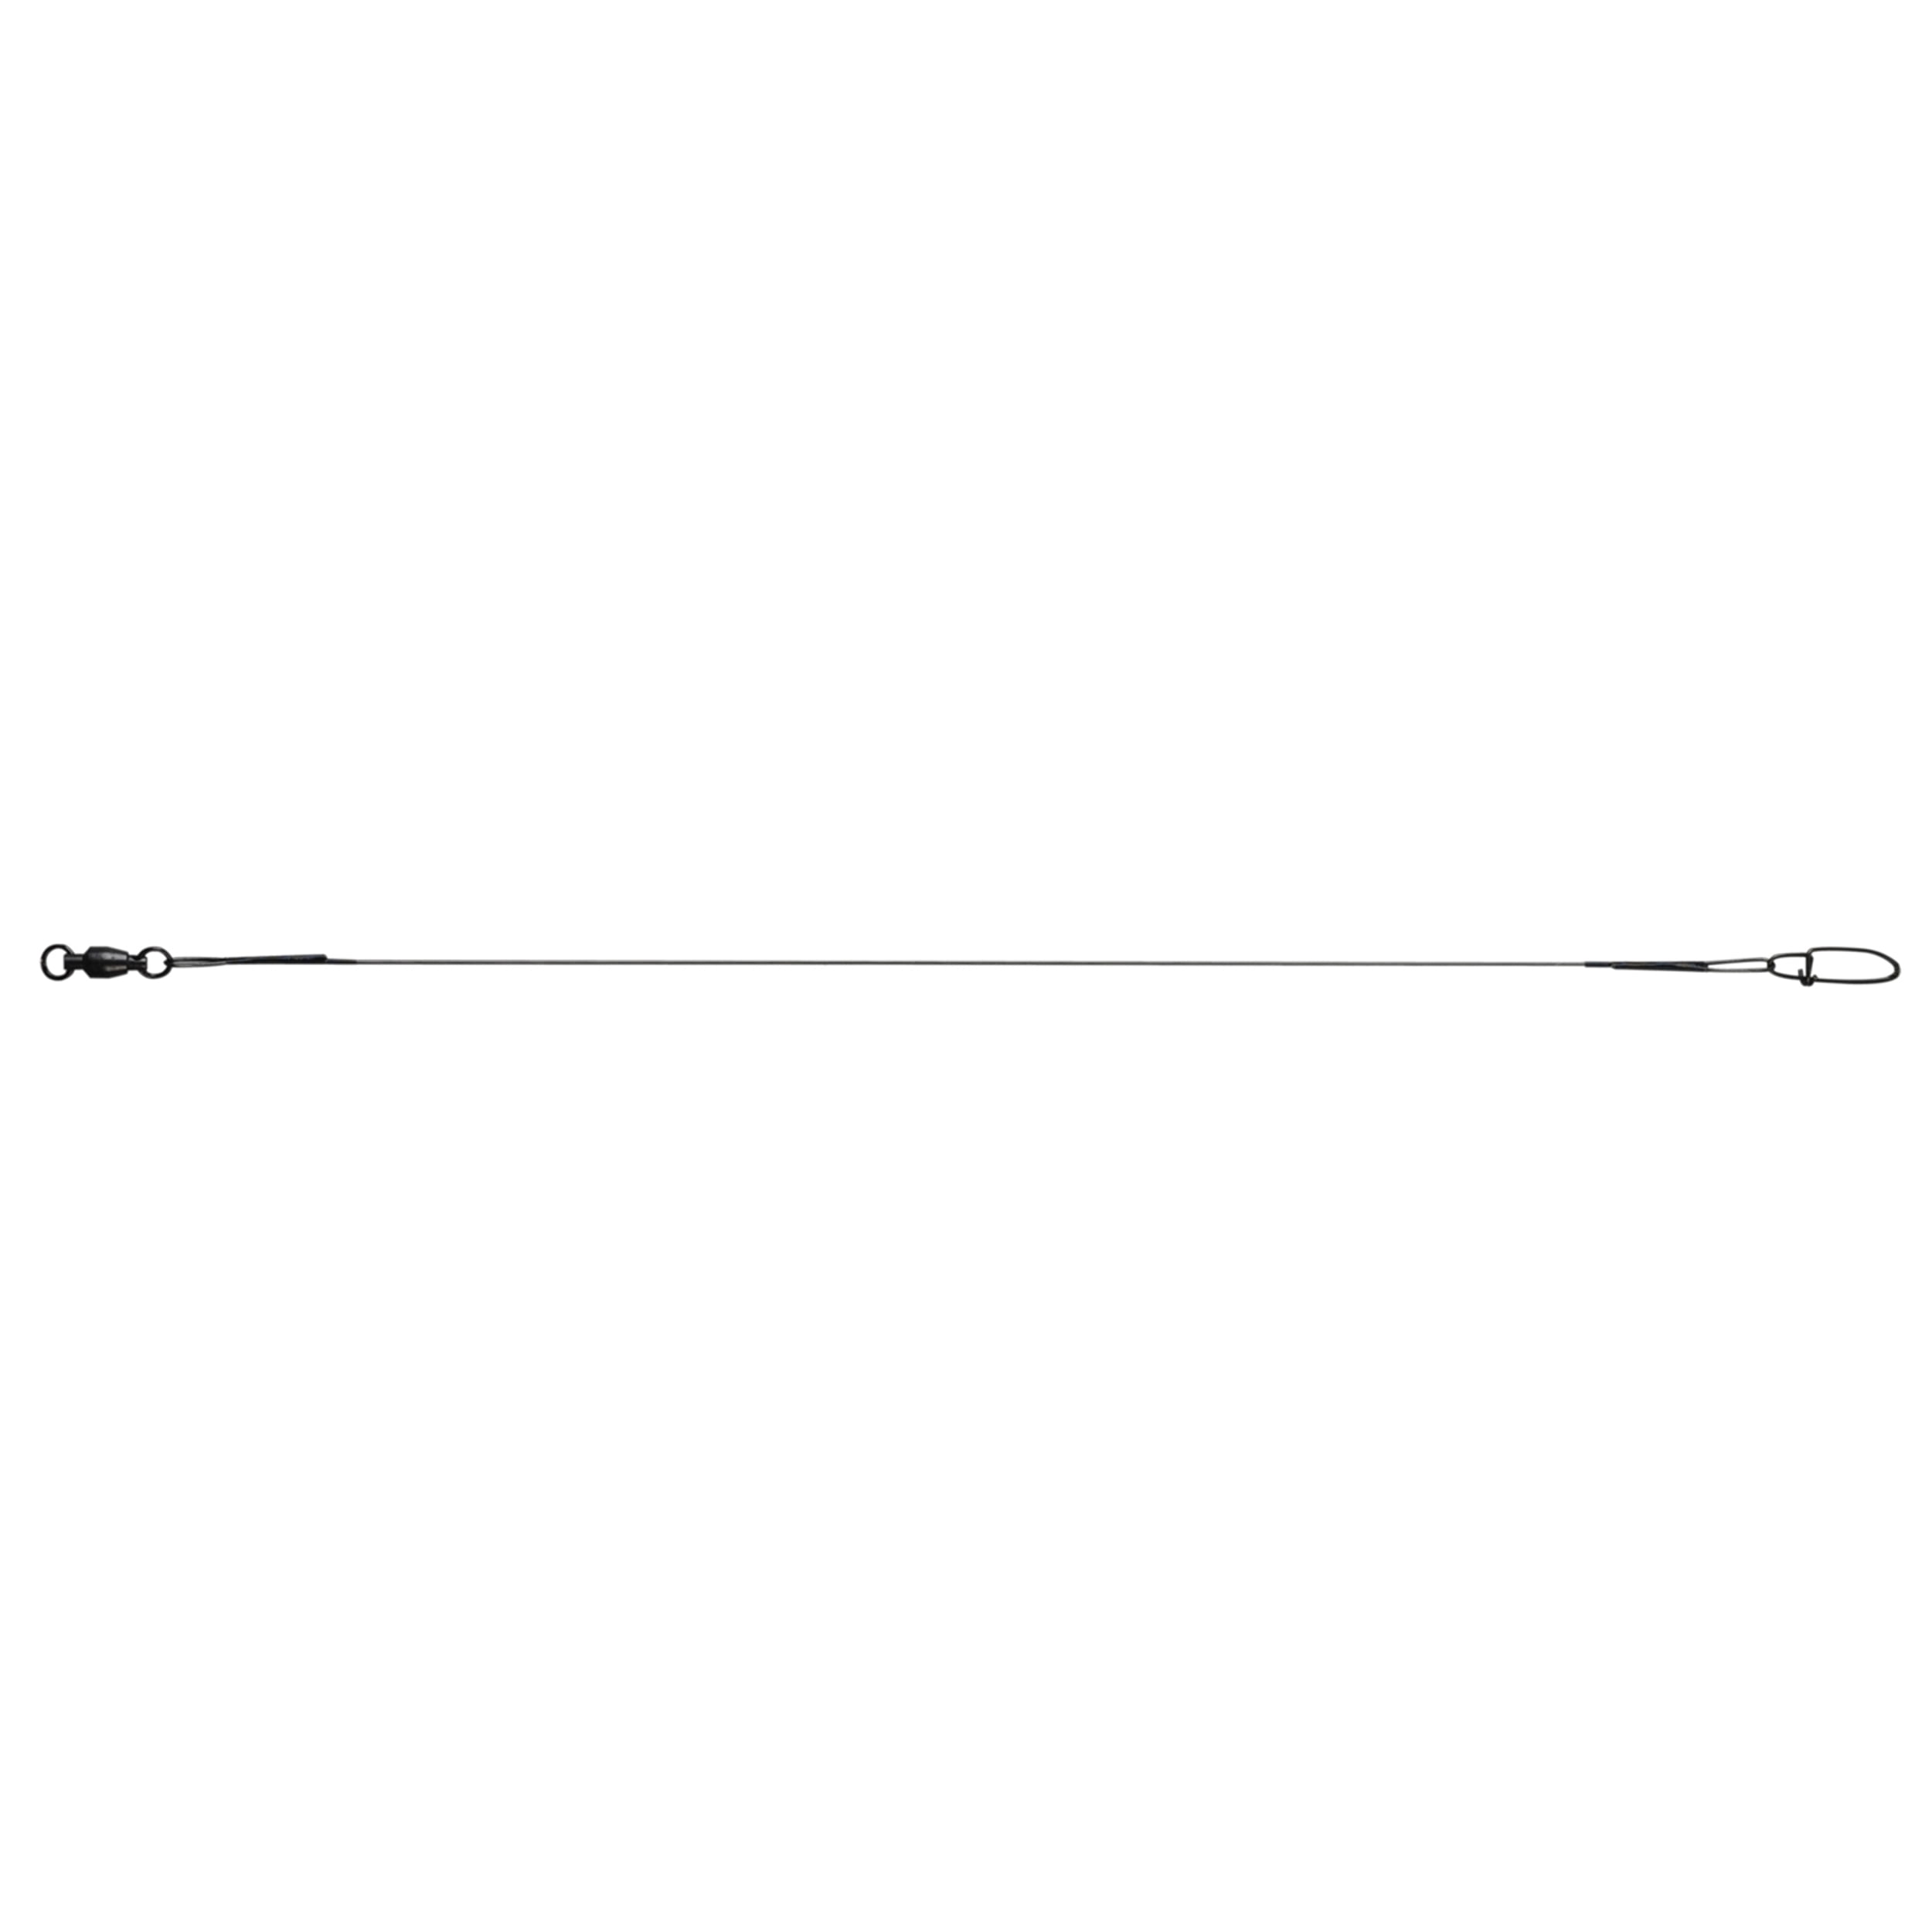 Black 9-Inch/30-Pound Berkley Ball Bearing Steel Lok Wire-Wound Leaders with Line Test 3-Pack